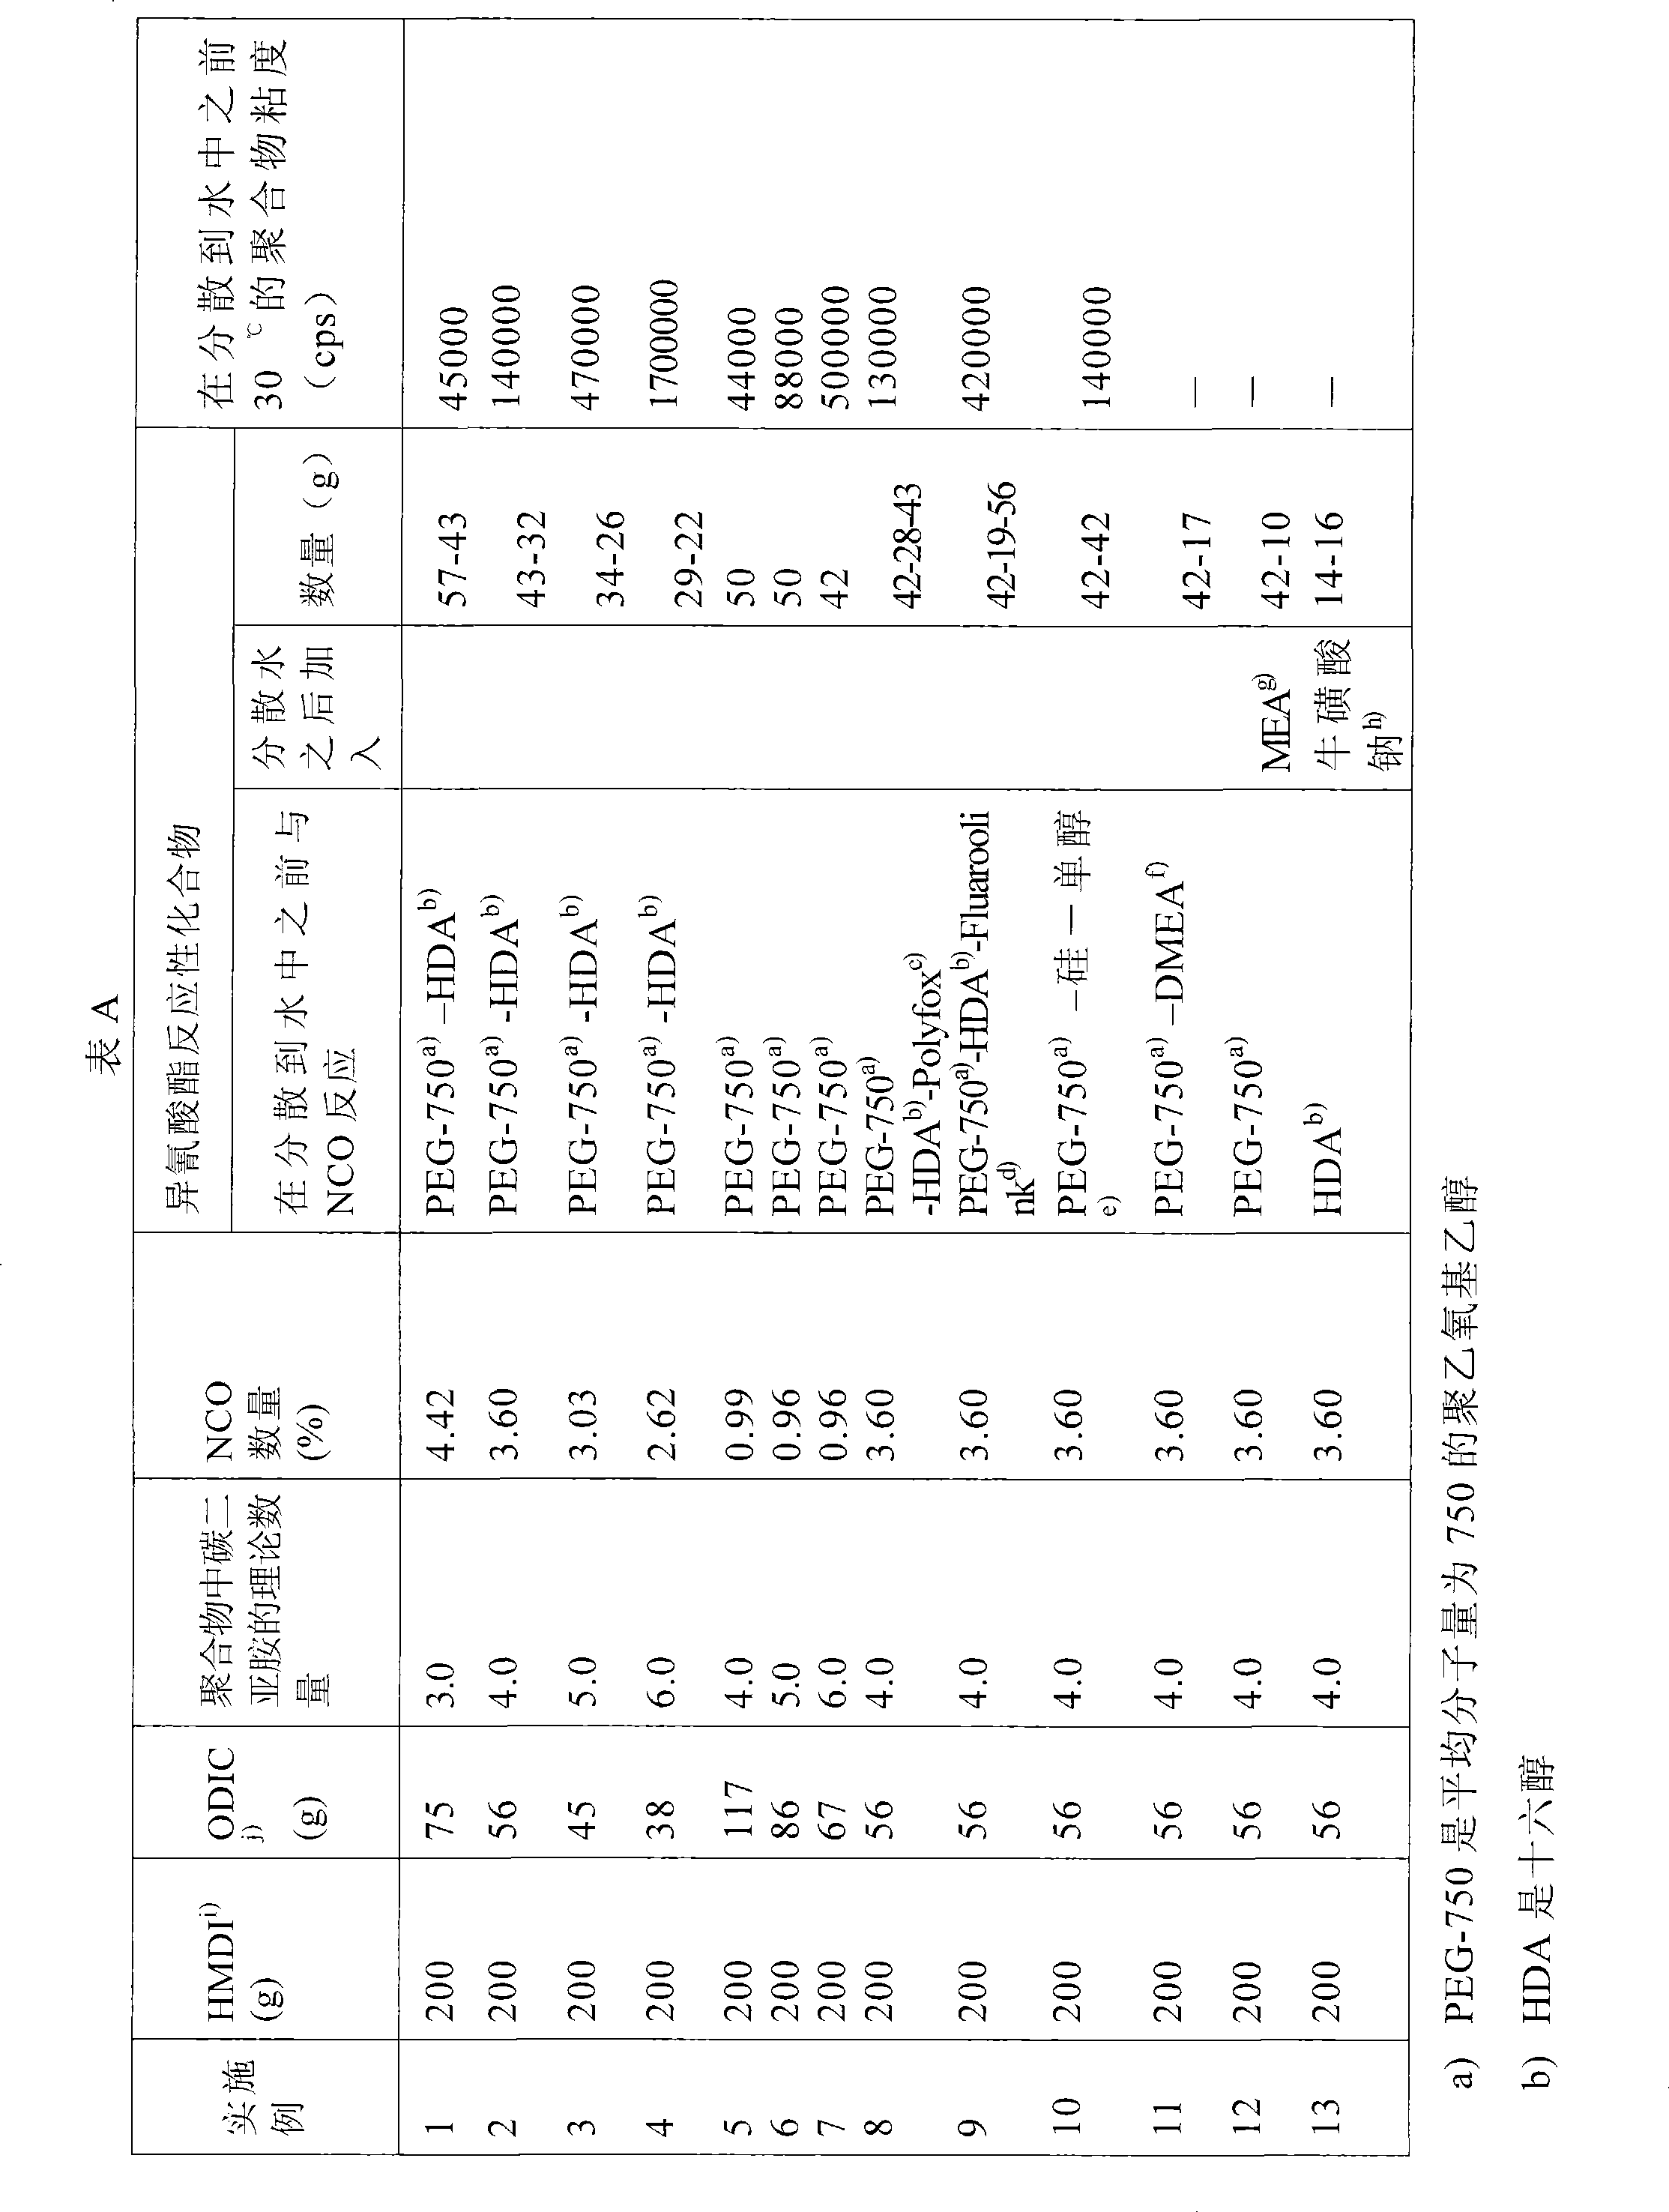 Process for the preparation of dispersions of cross-linking agents in water